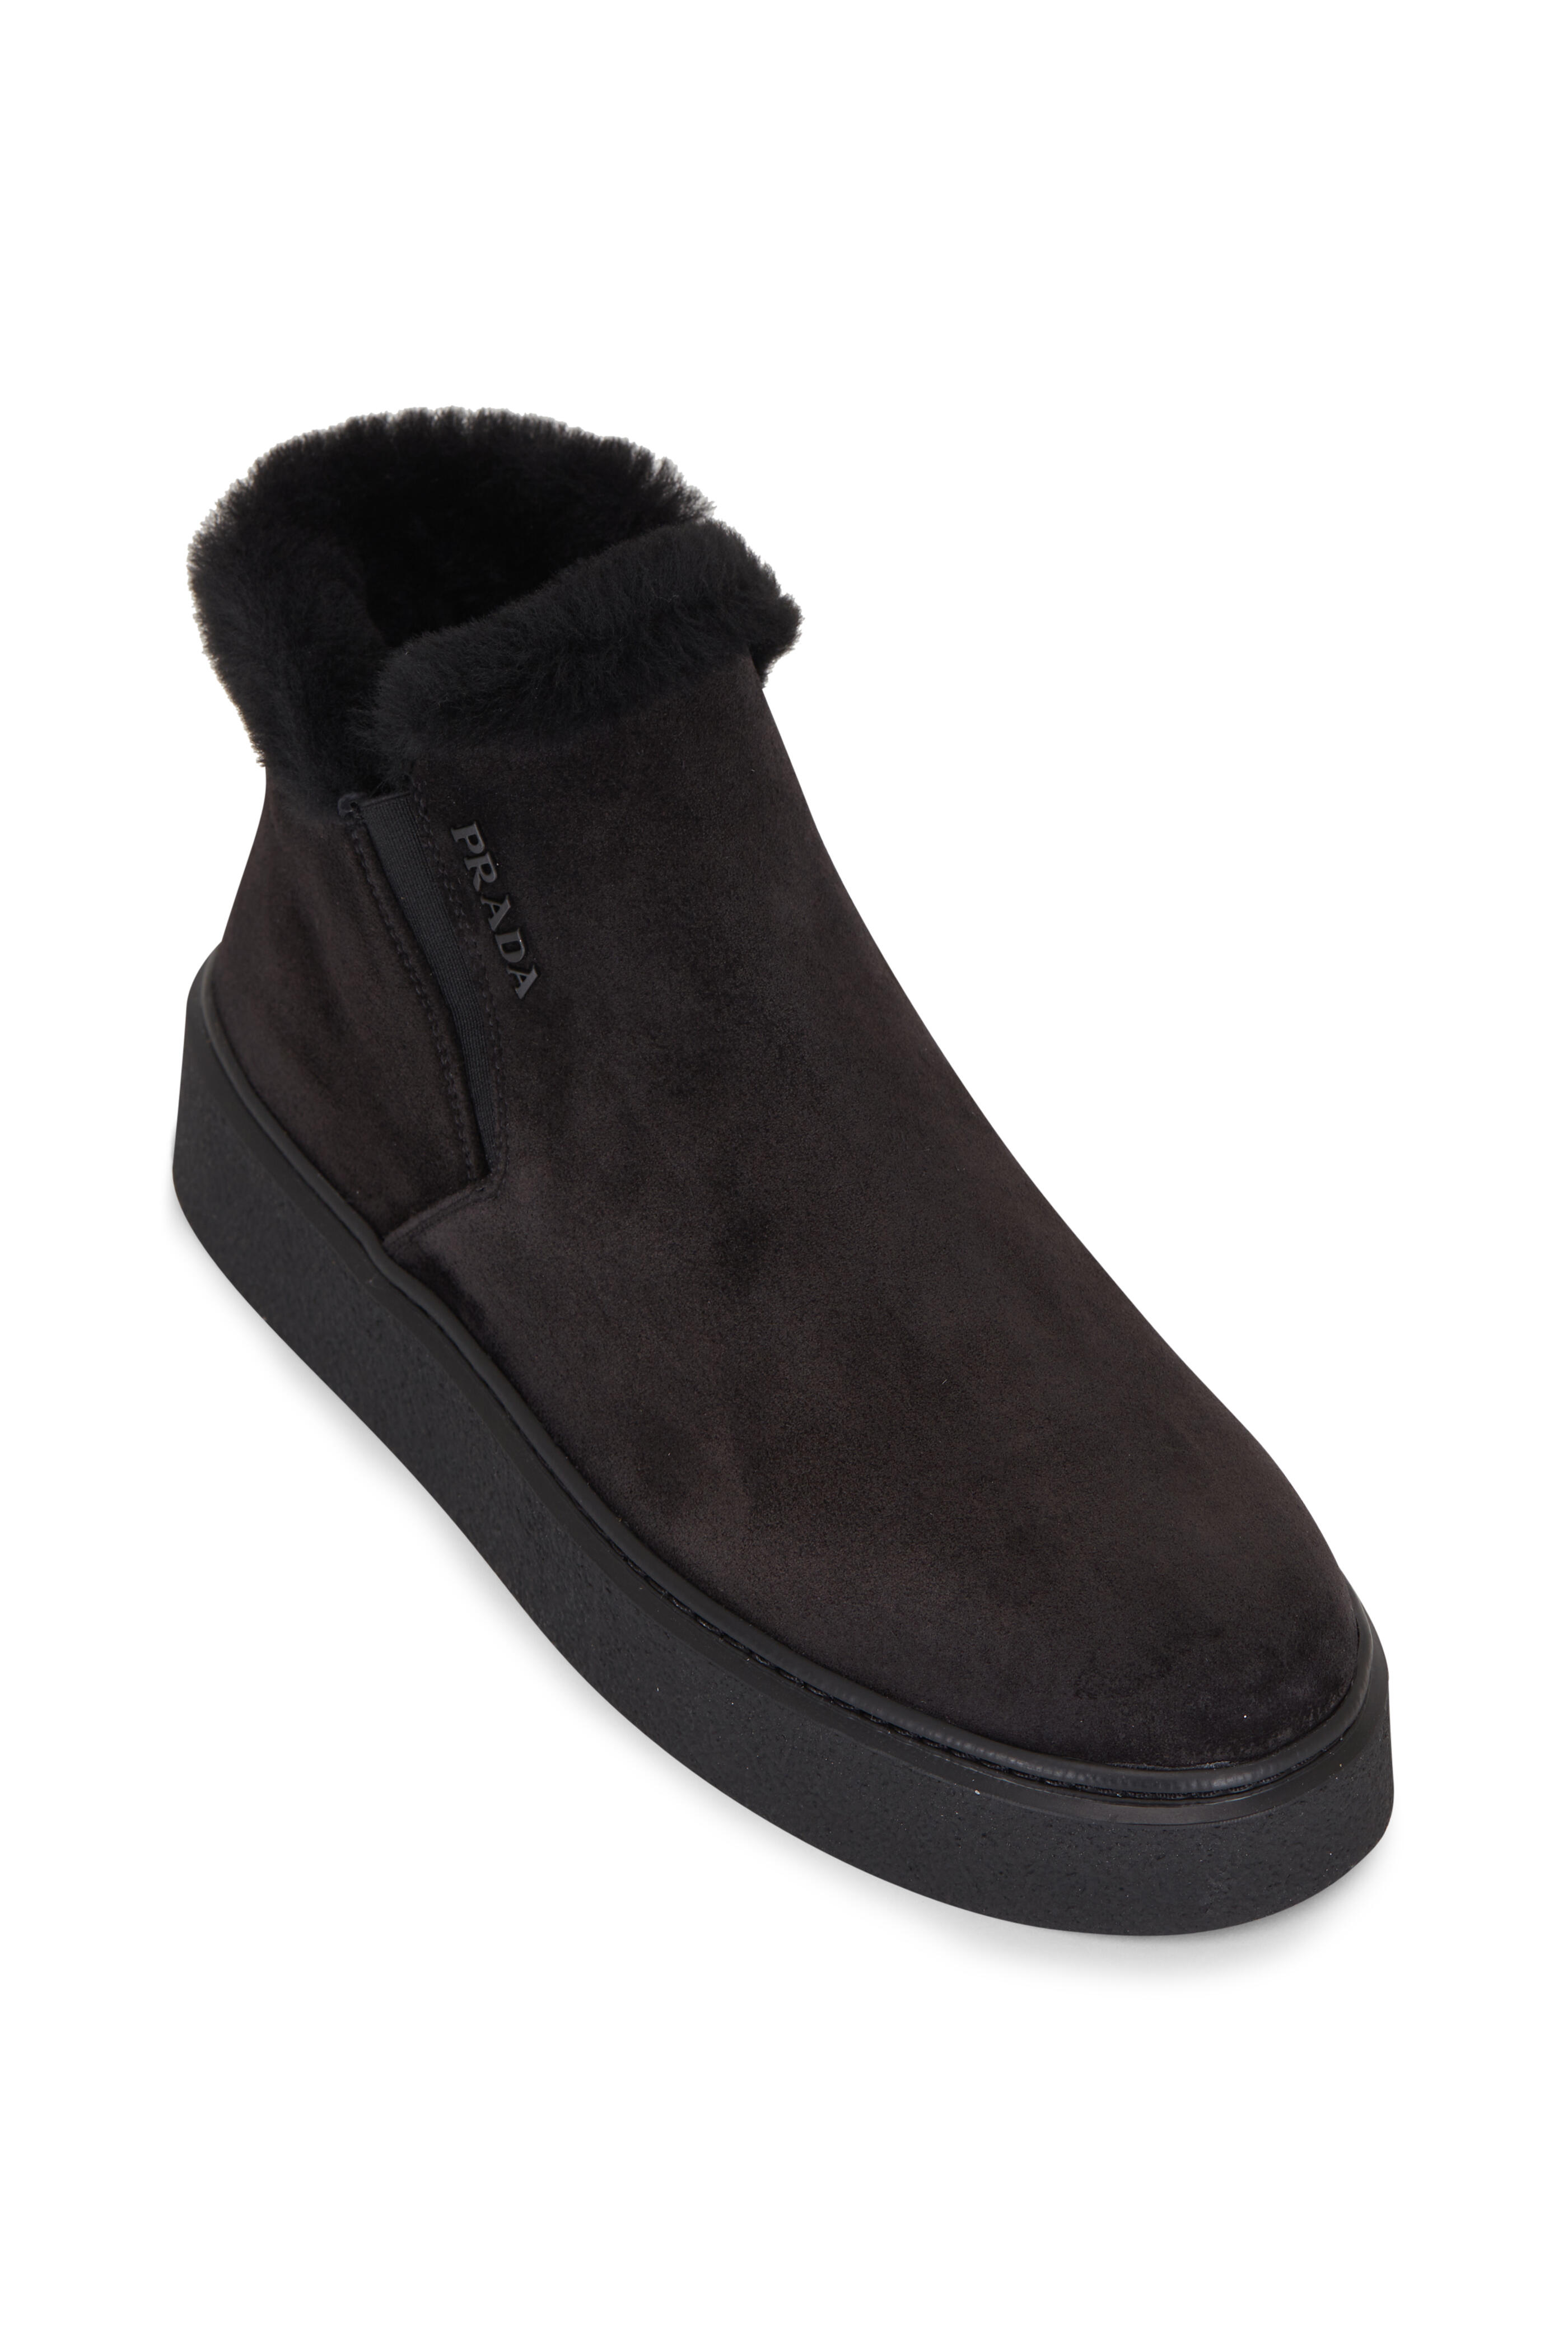 Prada - Black Suede Shearling Ankle Boot | Mitchell Stores